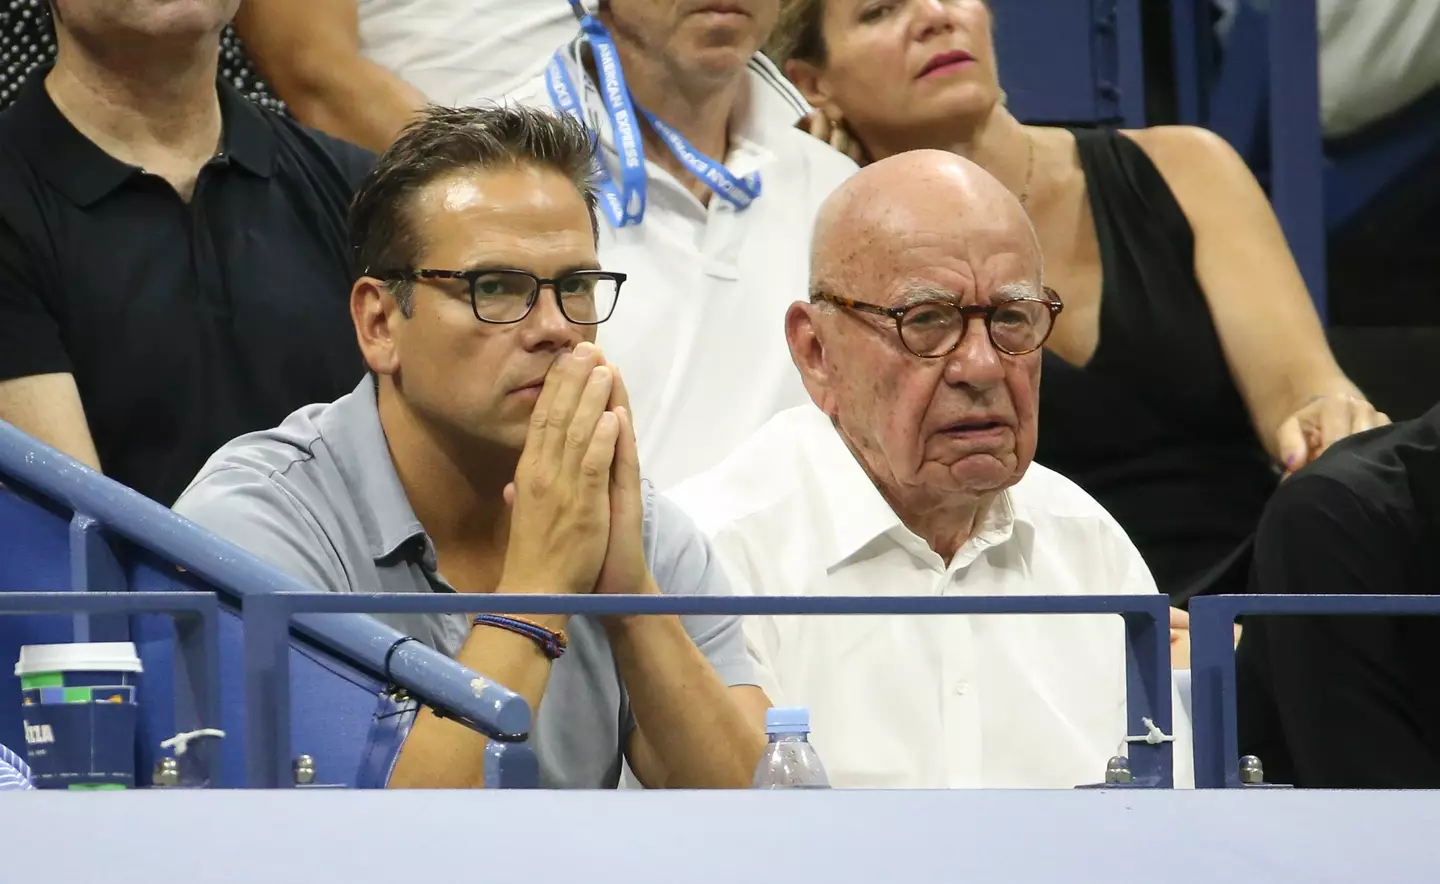 Rupert Murdoch will be succeeded by his son Lachlan (left).